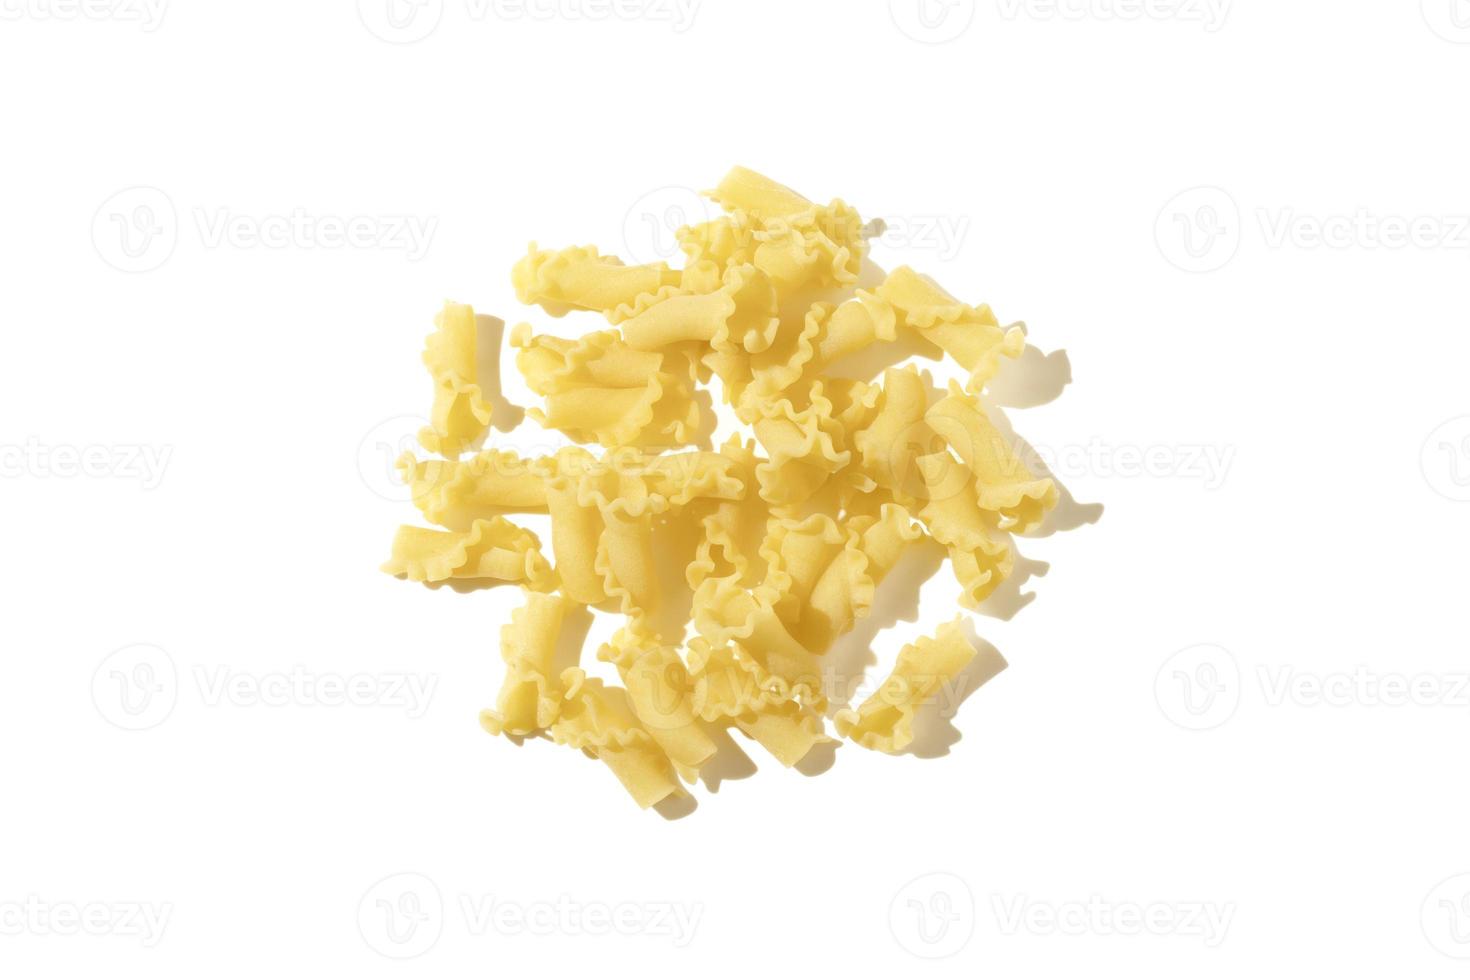 Creste di gallo pasta isolated on white background. Heap of uncooked dried pasta, traditional Italian cuisine. Top view. photo